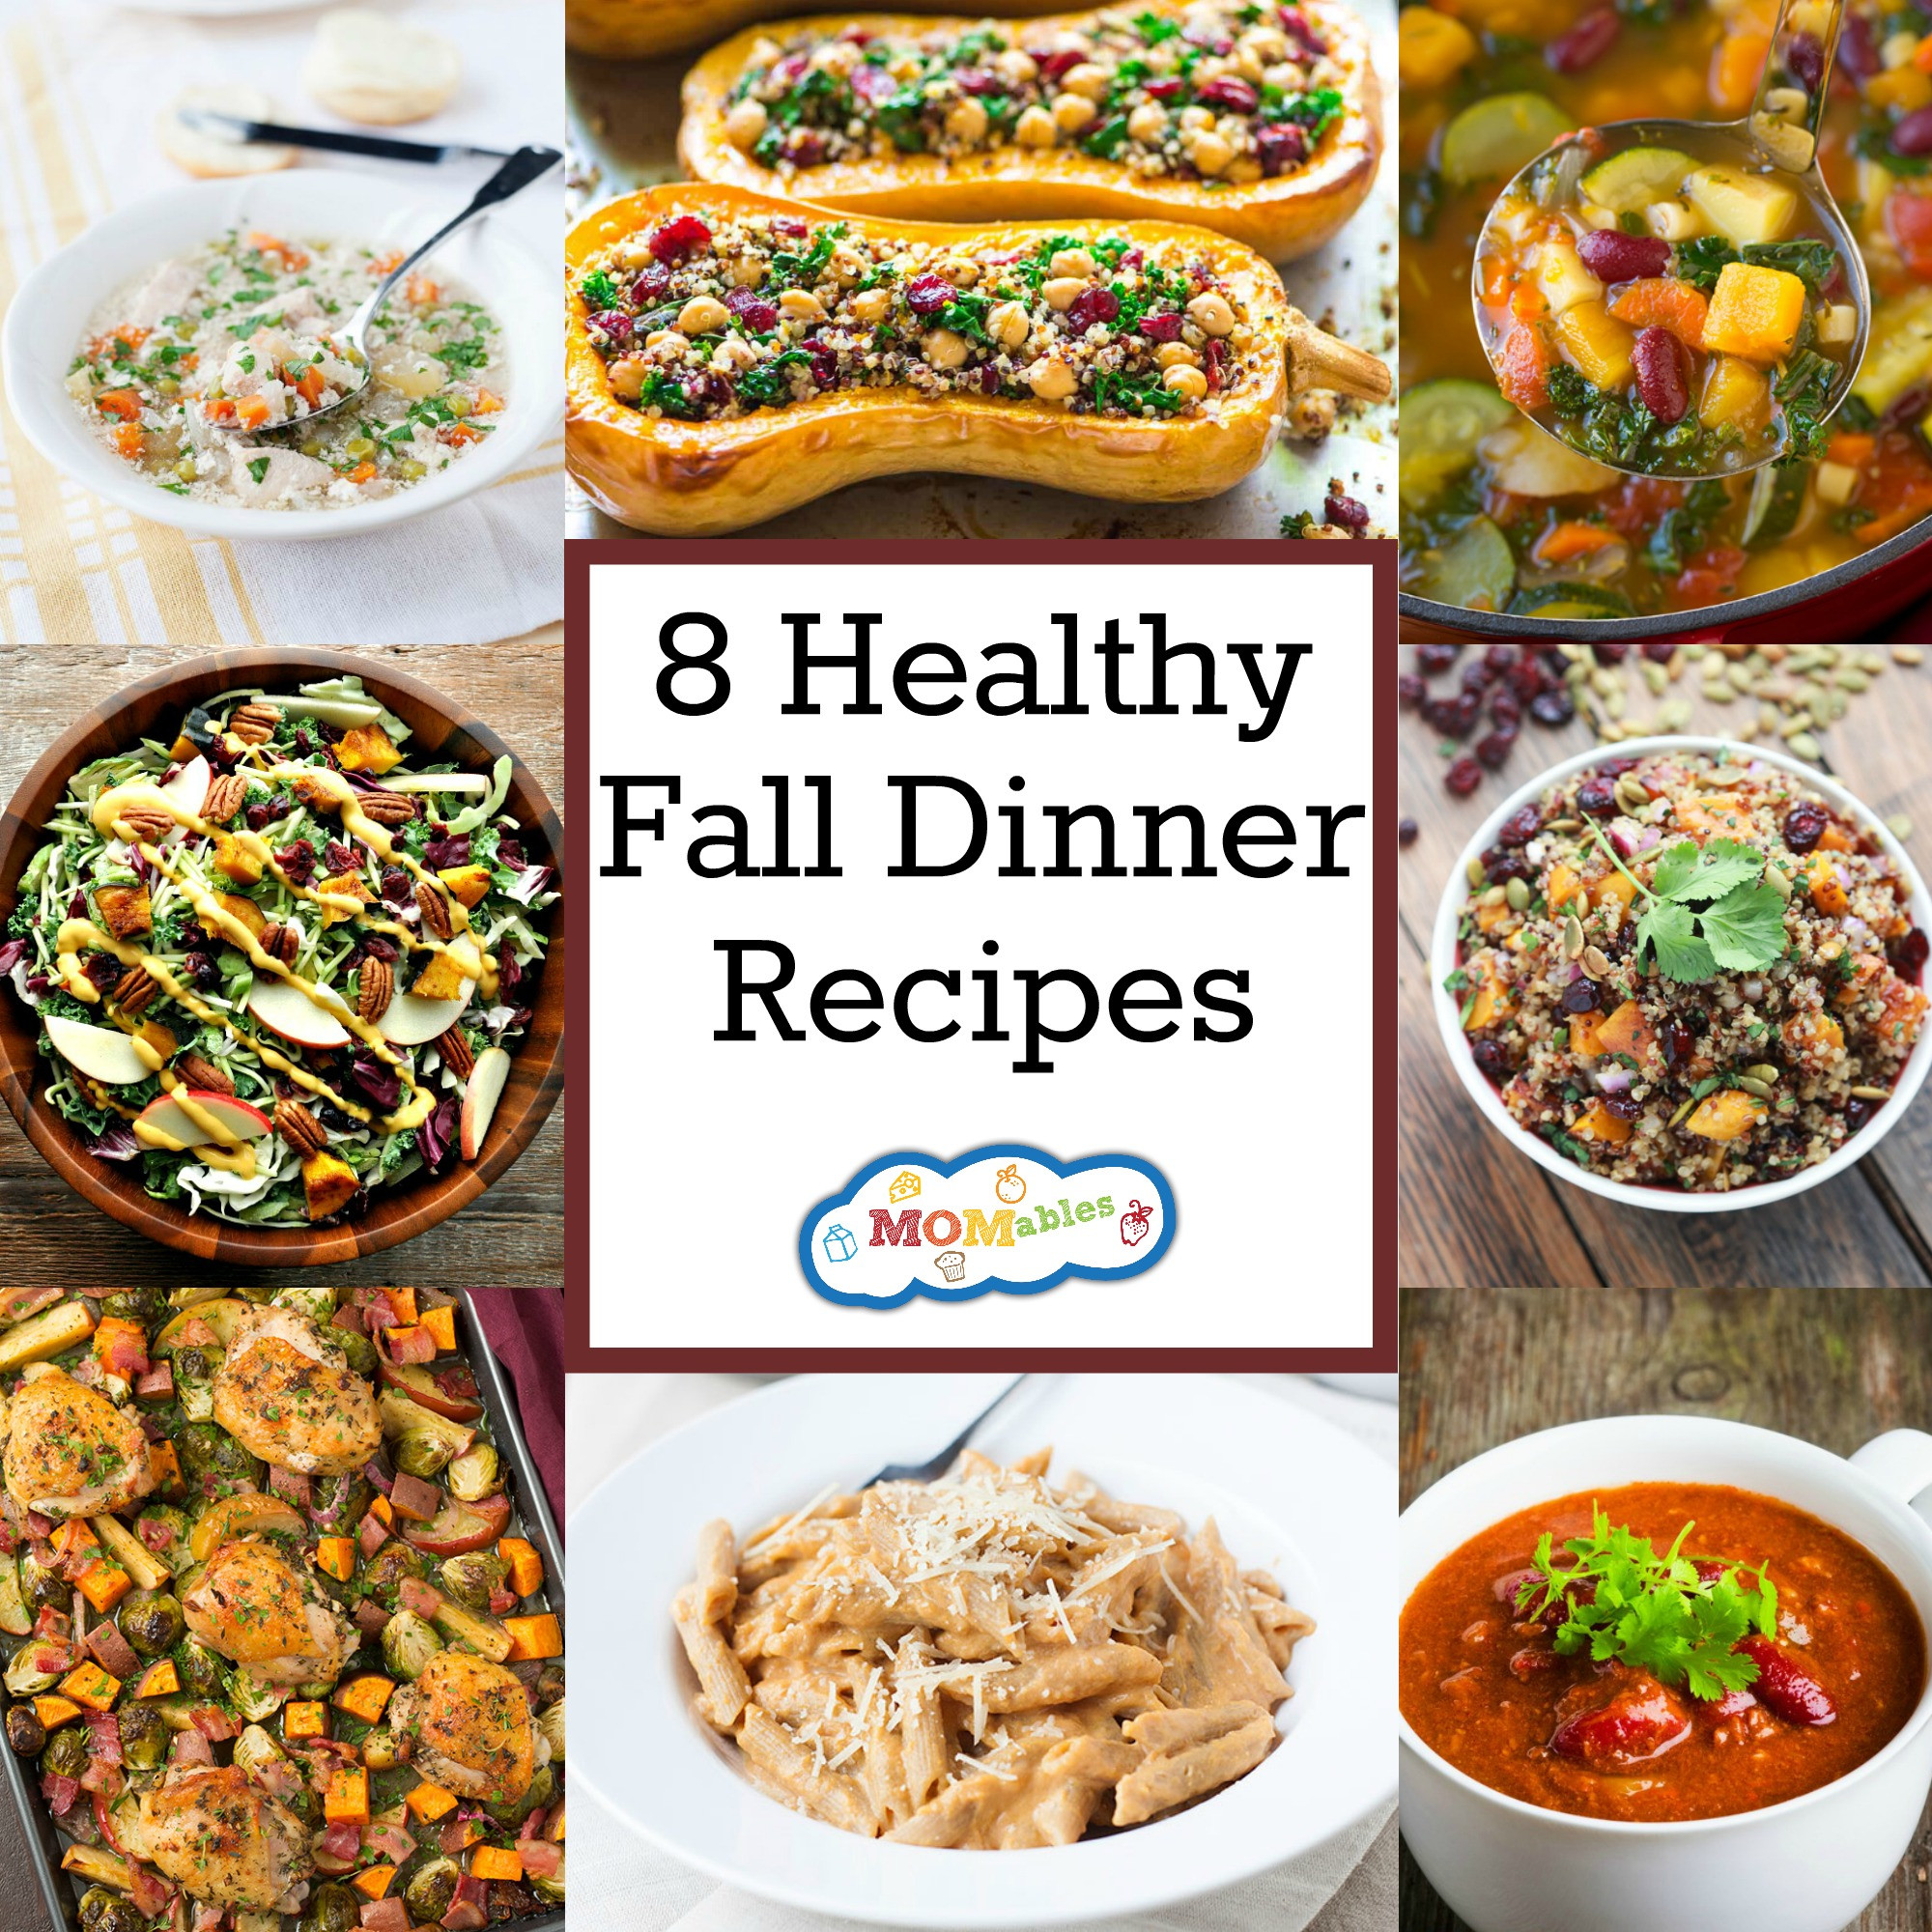 Healthy Fall Dinner Recipes
 8 Healthy Fall Dinner Recipes MOMables Good Food